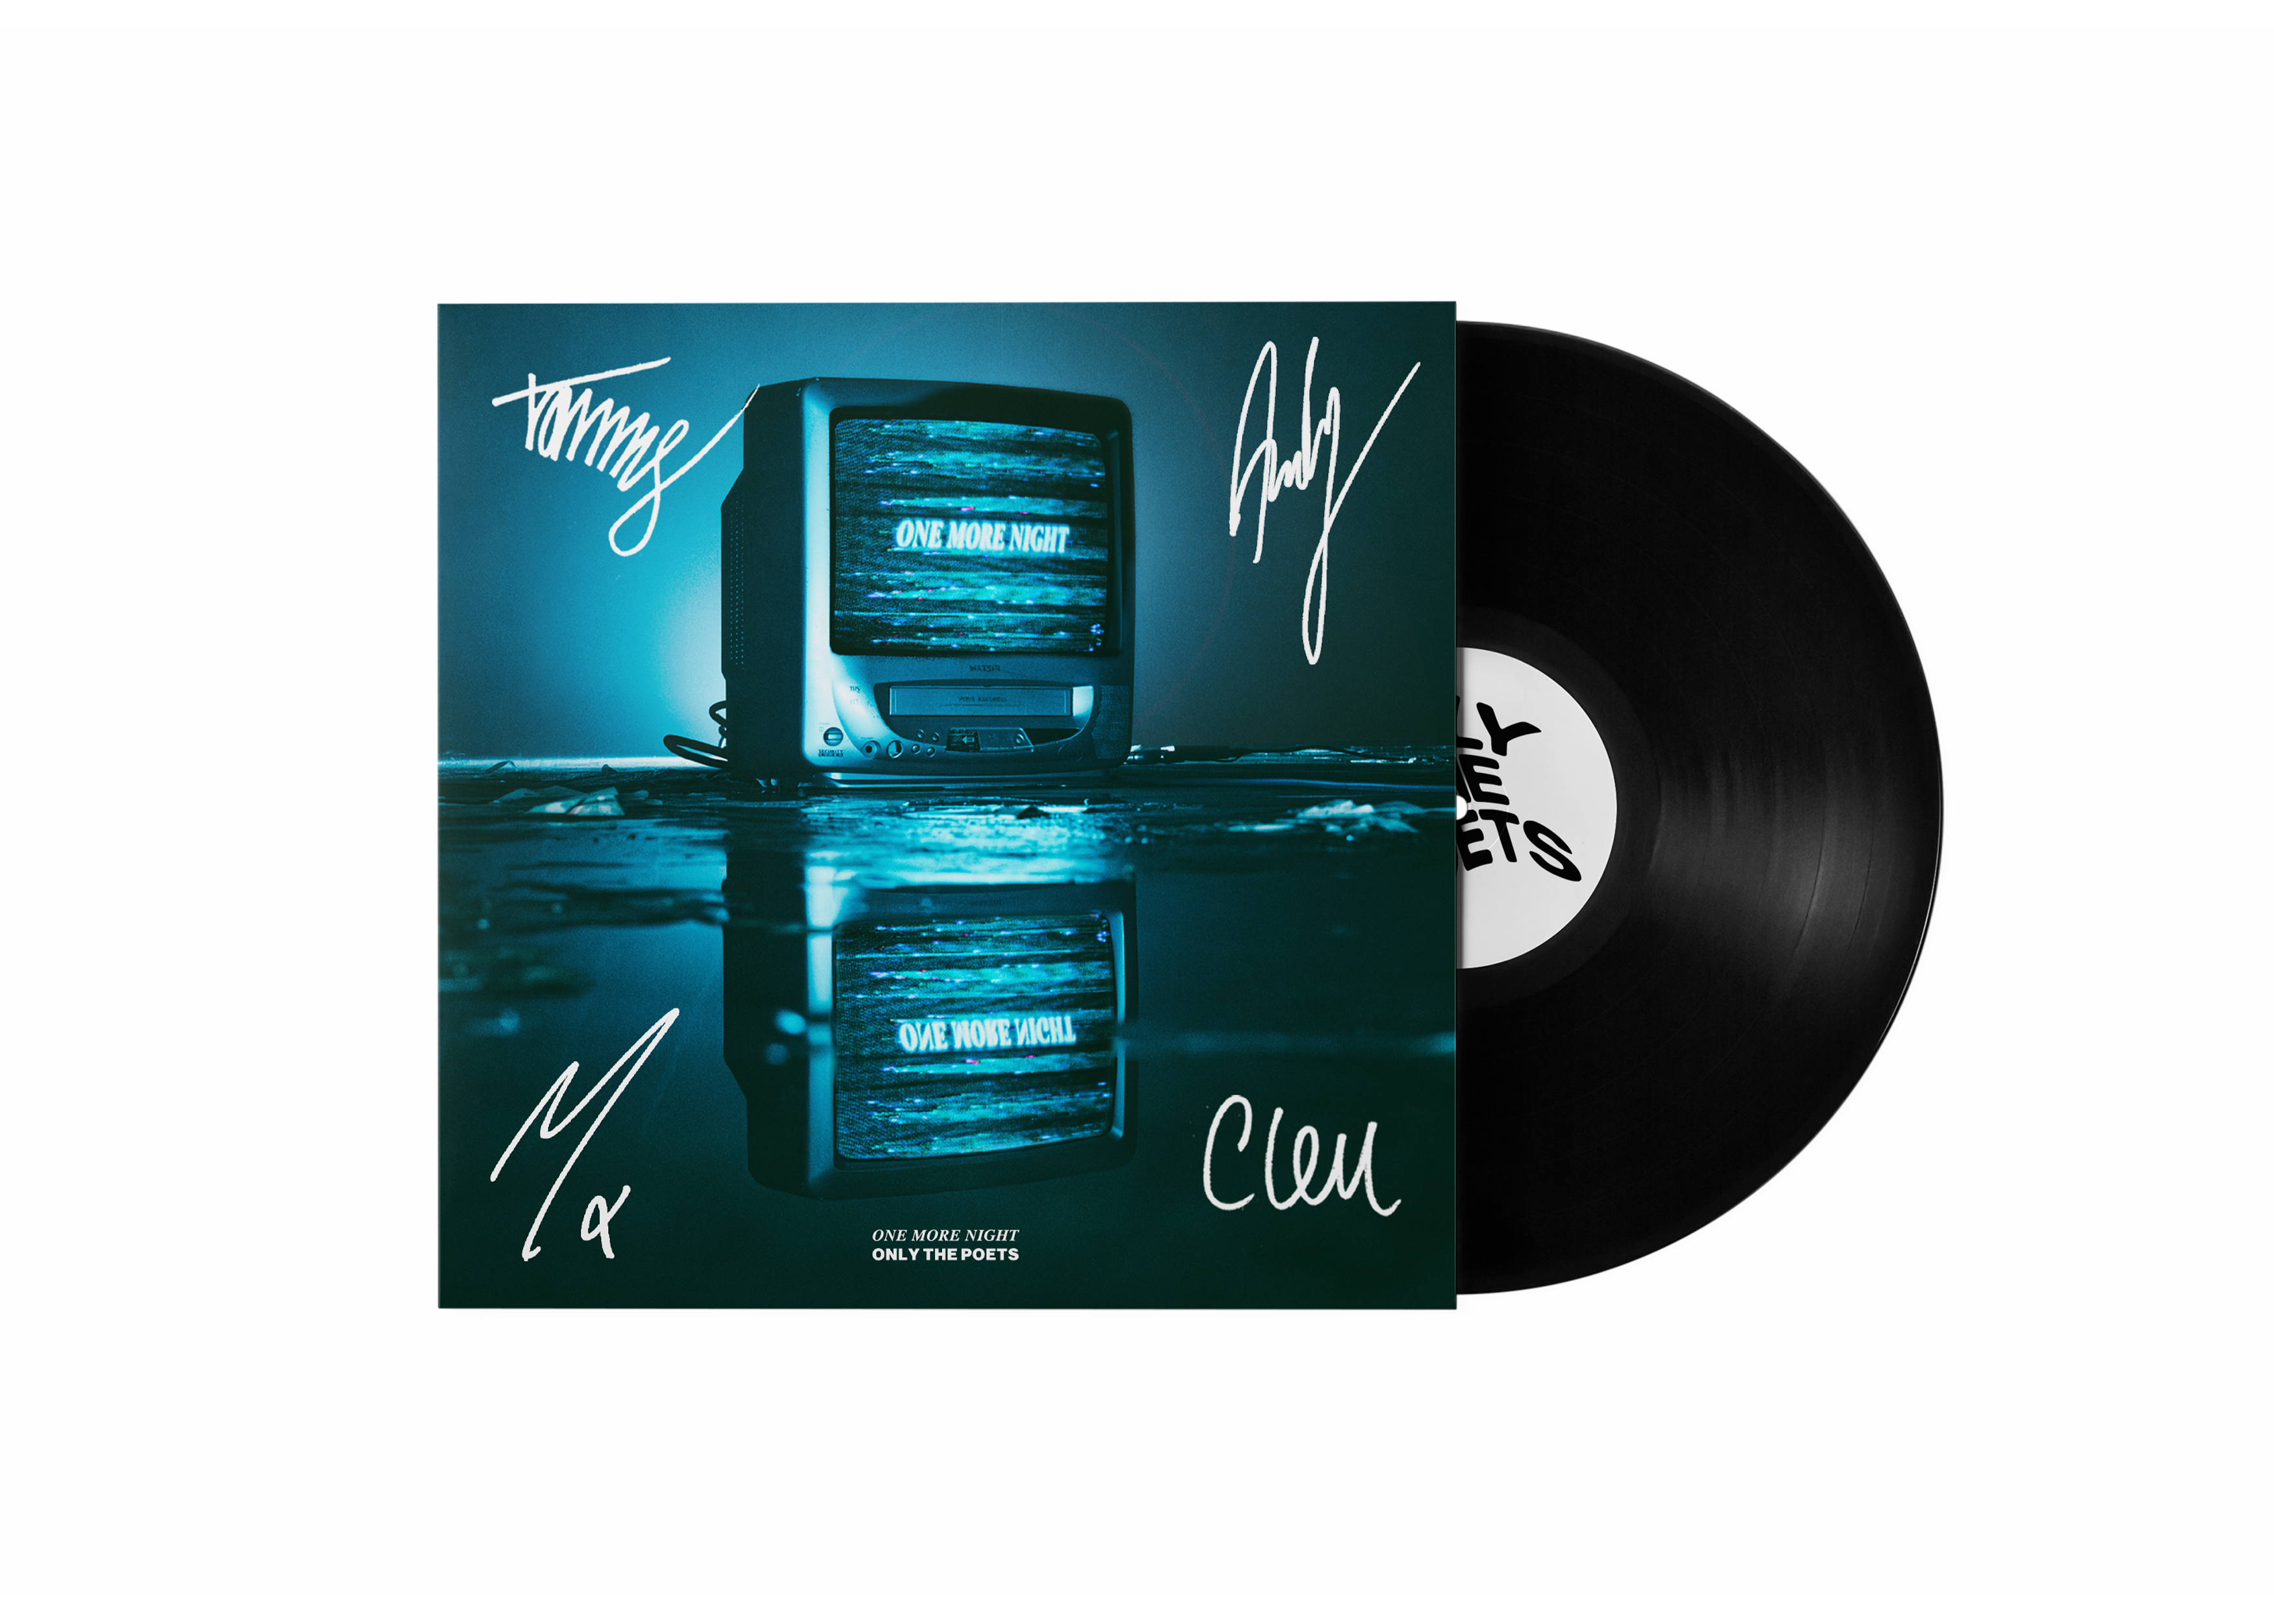 One More Night: Signed Vinyl LP + Signed CD